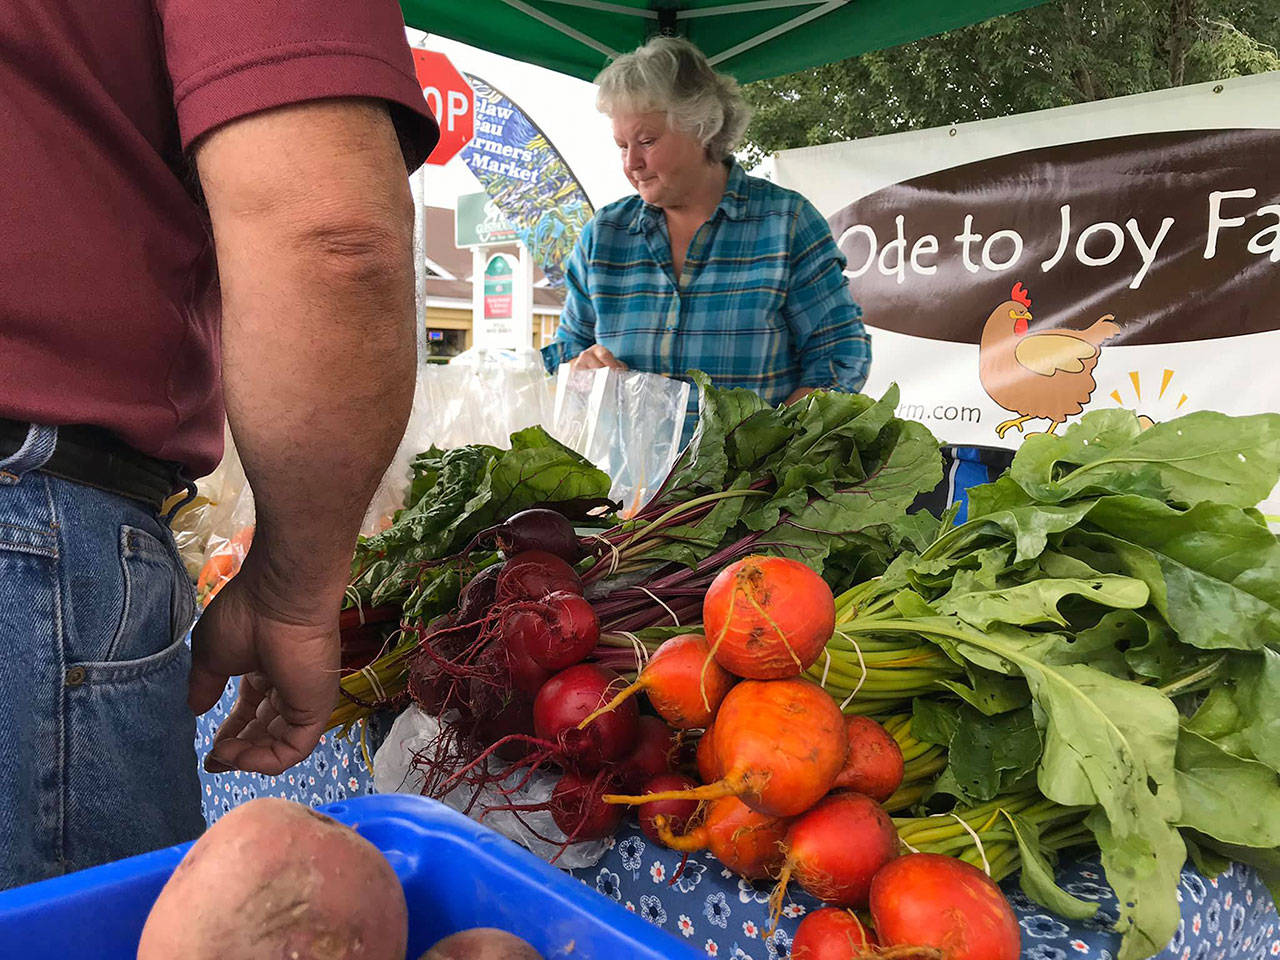 With additional funds from the city of Enumclaw, the Enumclaw Plateau Farmer’s Market will be able to allow those who receive Supplemental Nutritional Assistance Program (SNAP) benefits to shop for fresh produce. Image courtesy Enumclaw Plateau Farmer’s Market